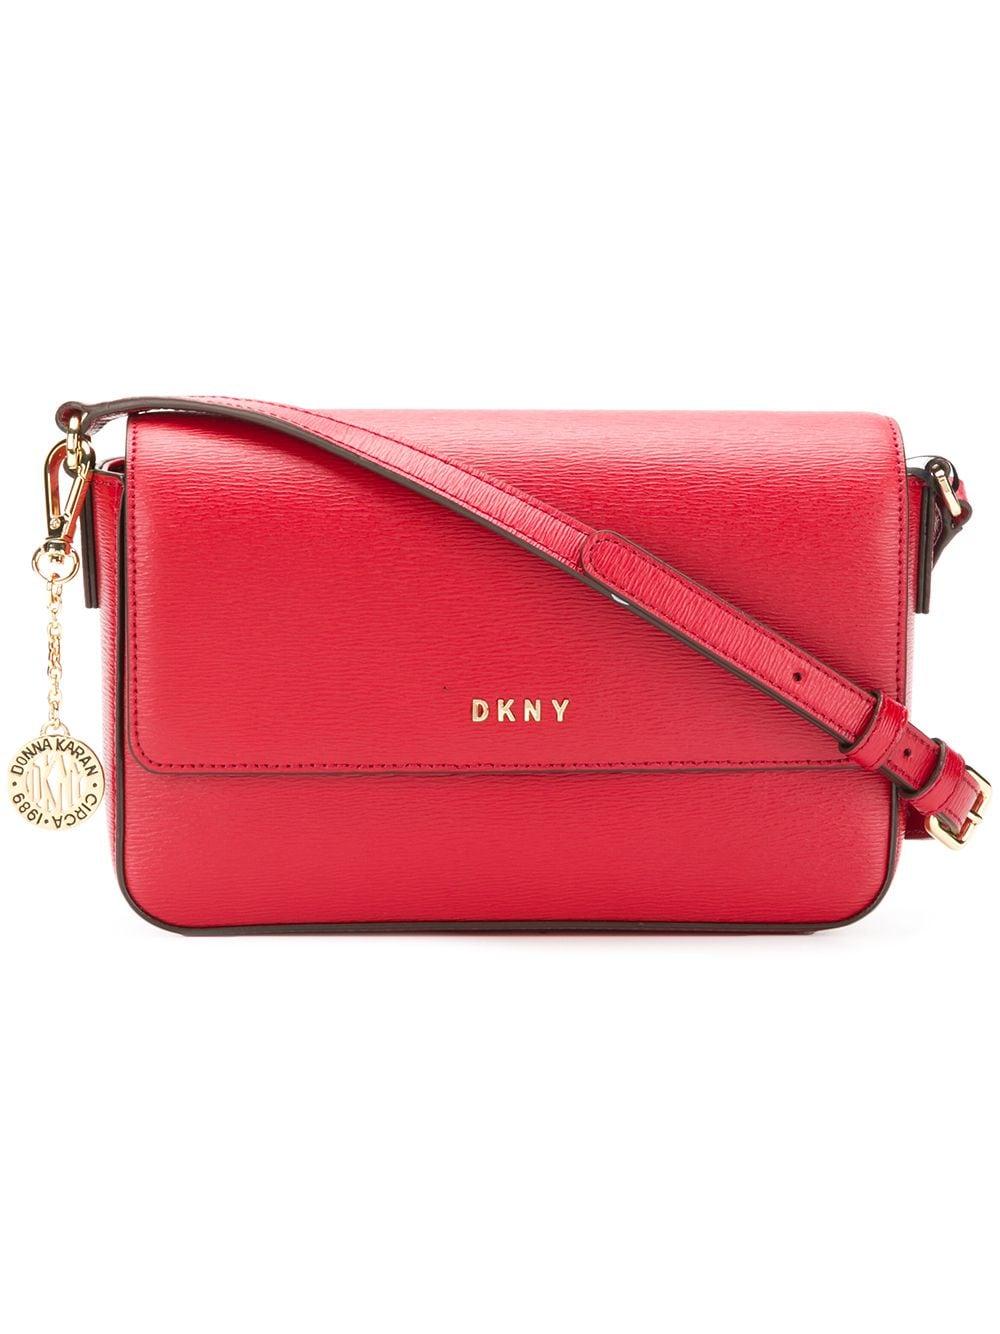 DKNY Bryant Leather Crossbody Bag in Red - Lyst